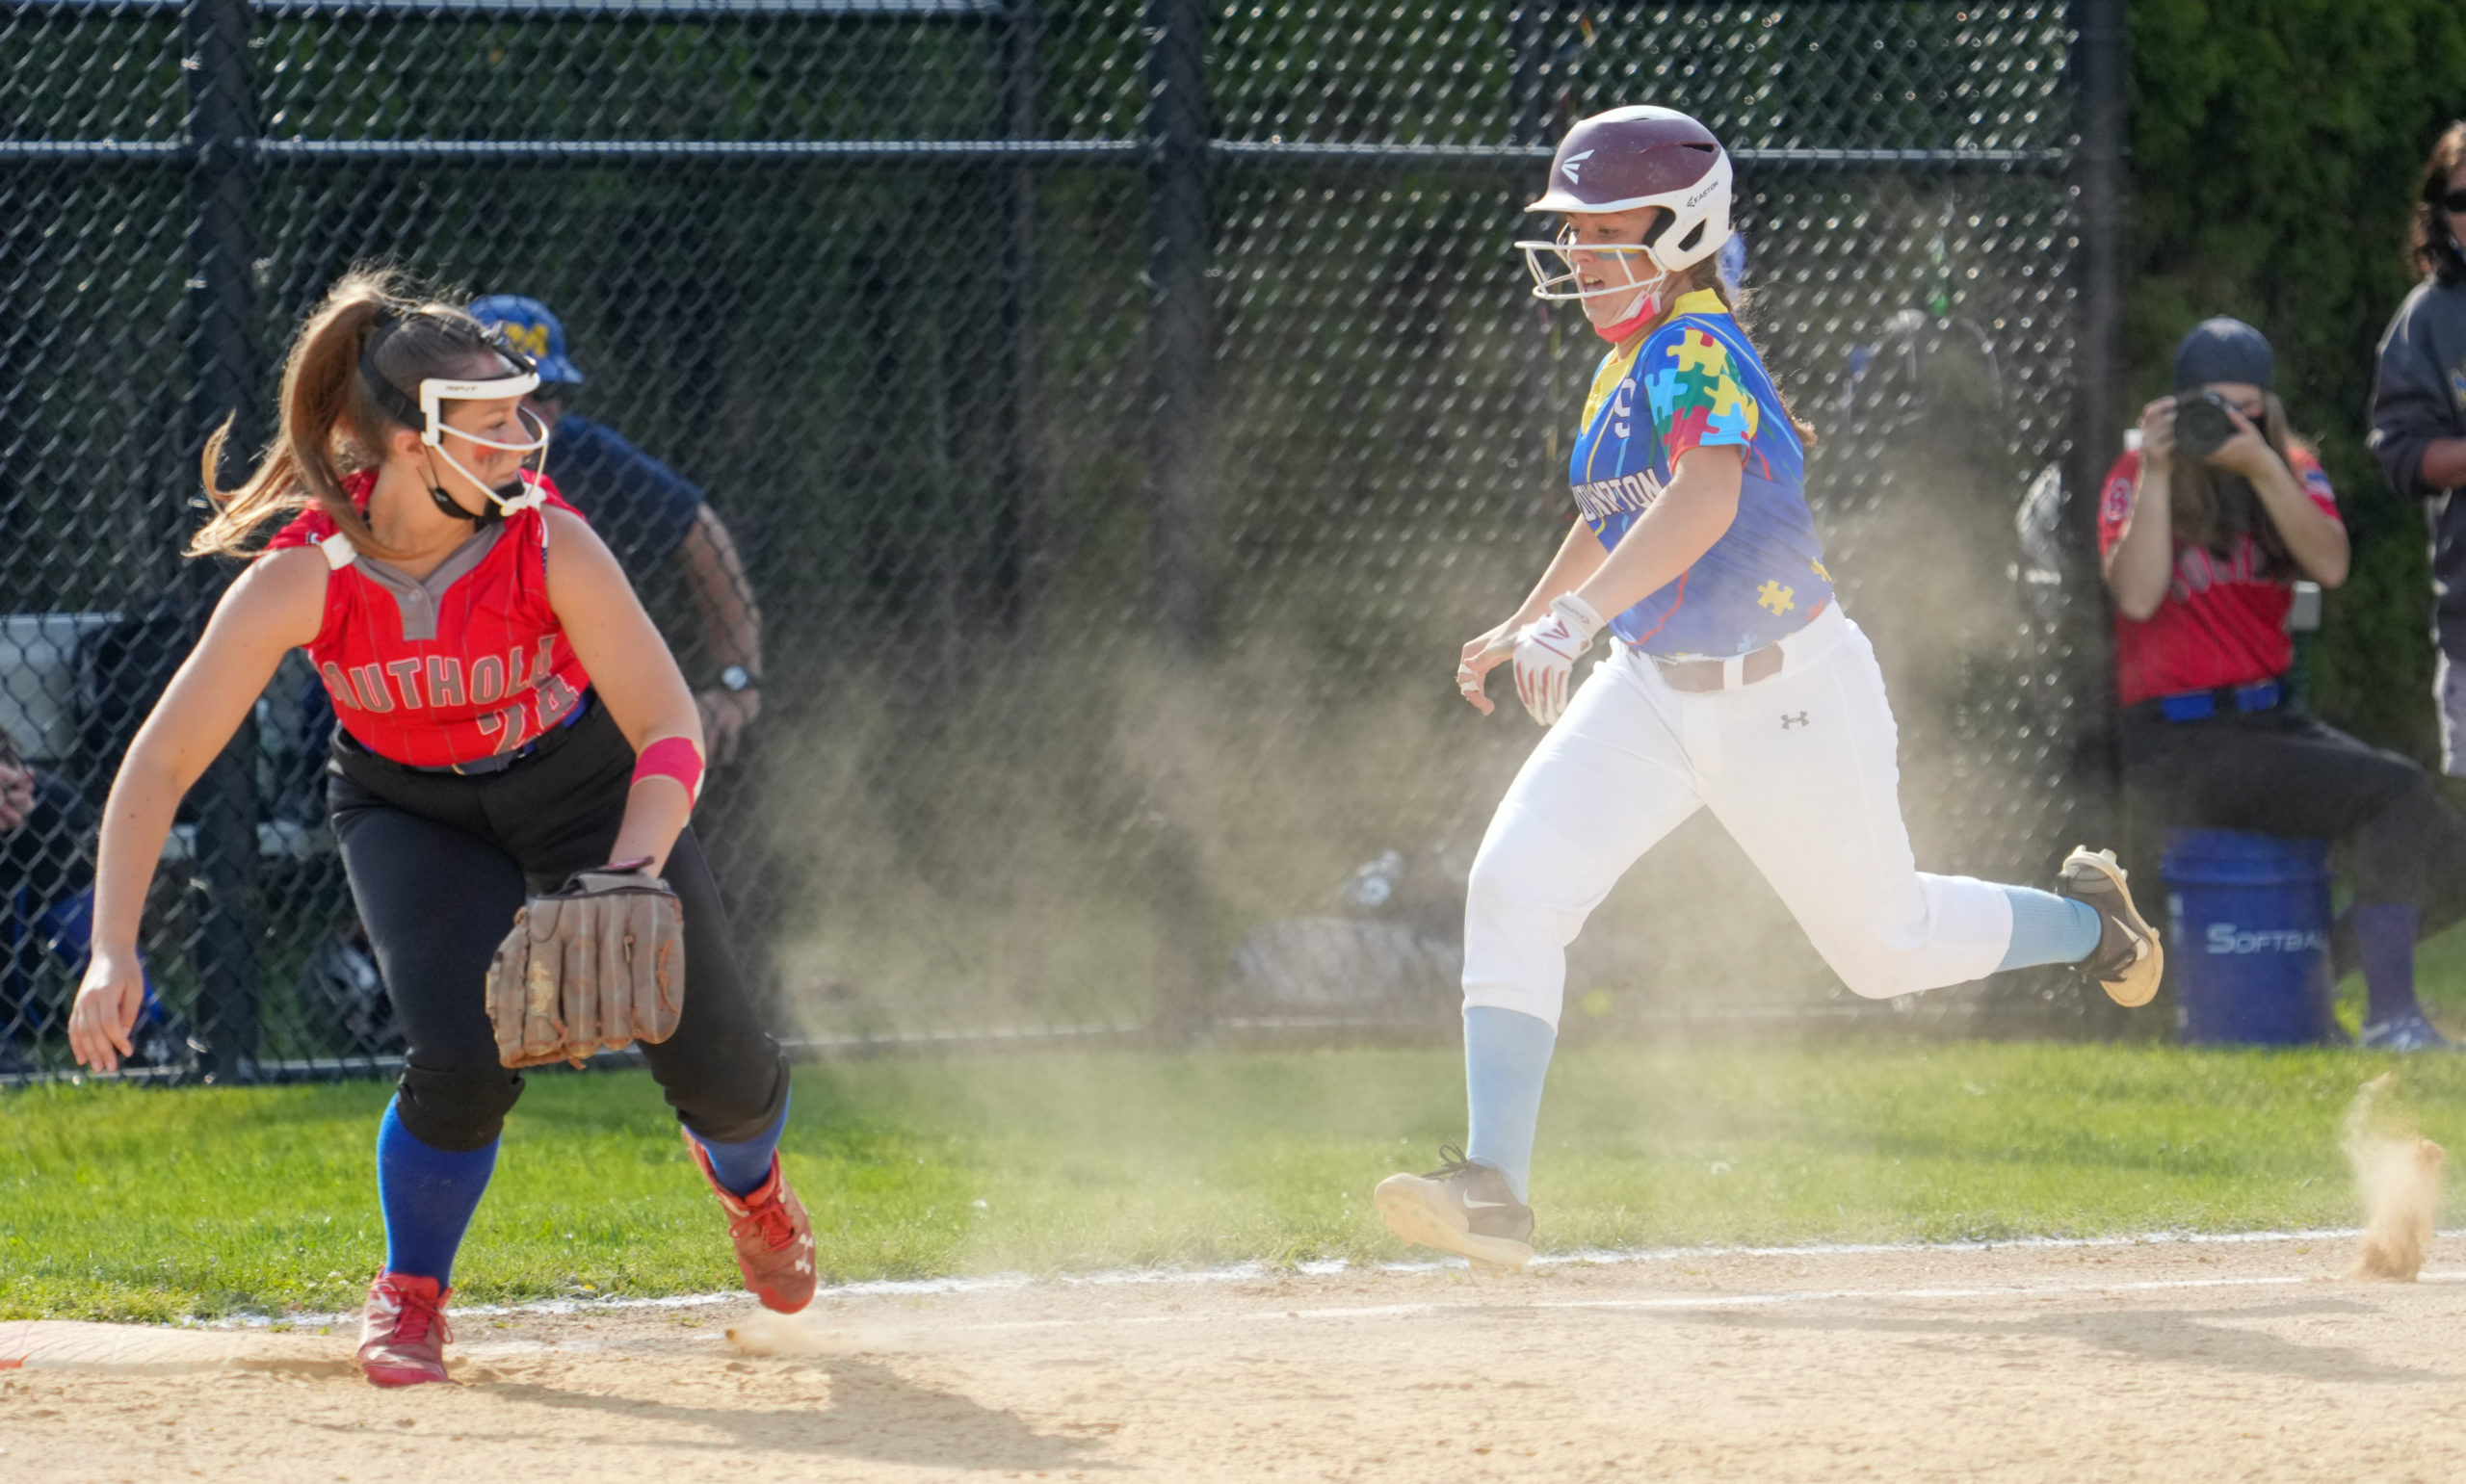 Southampton's Ellie Avallone races to first base.